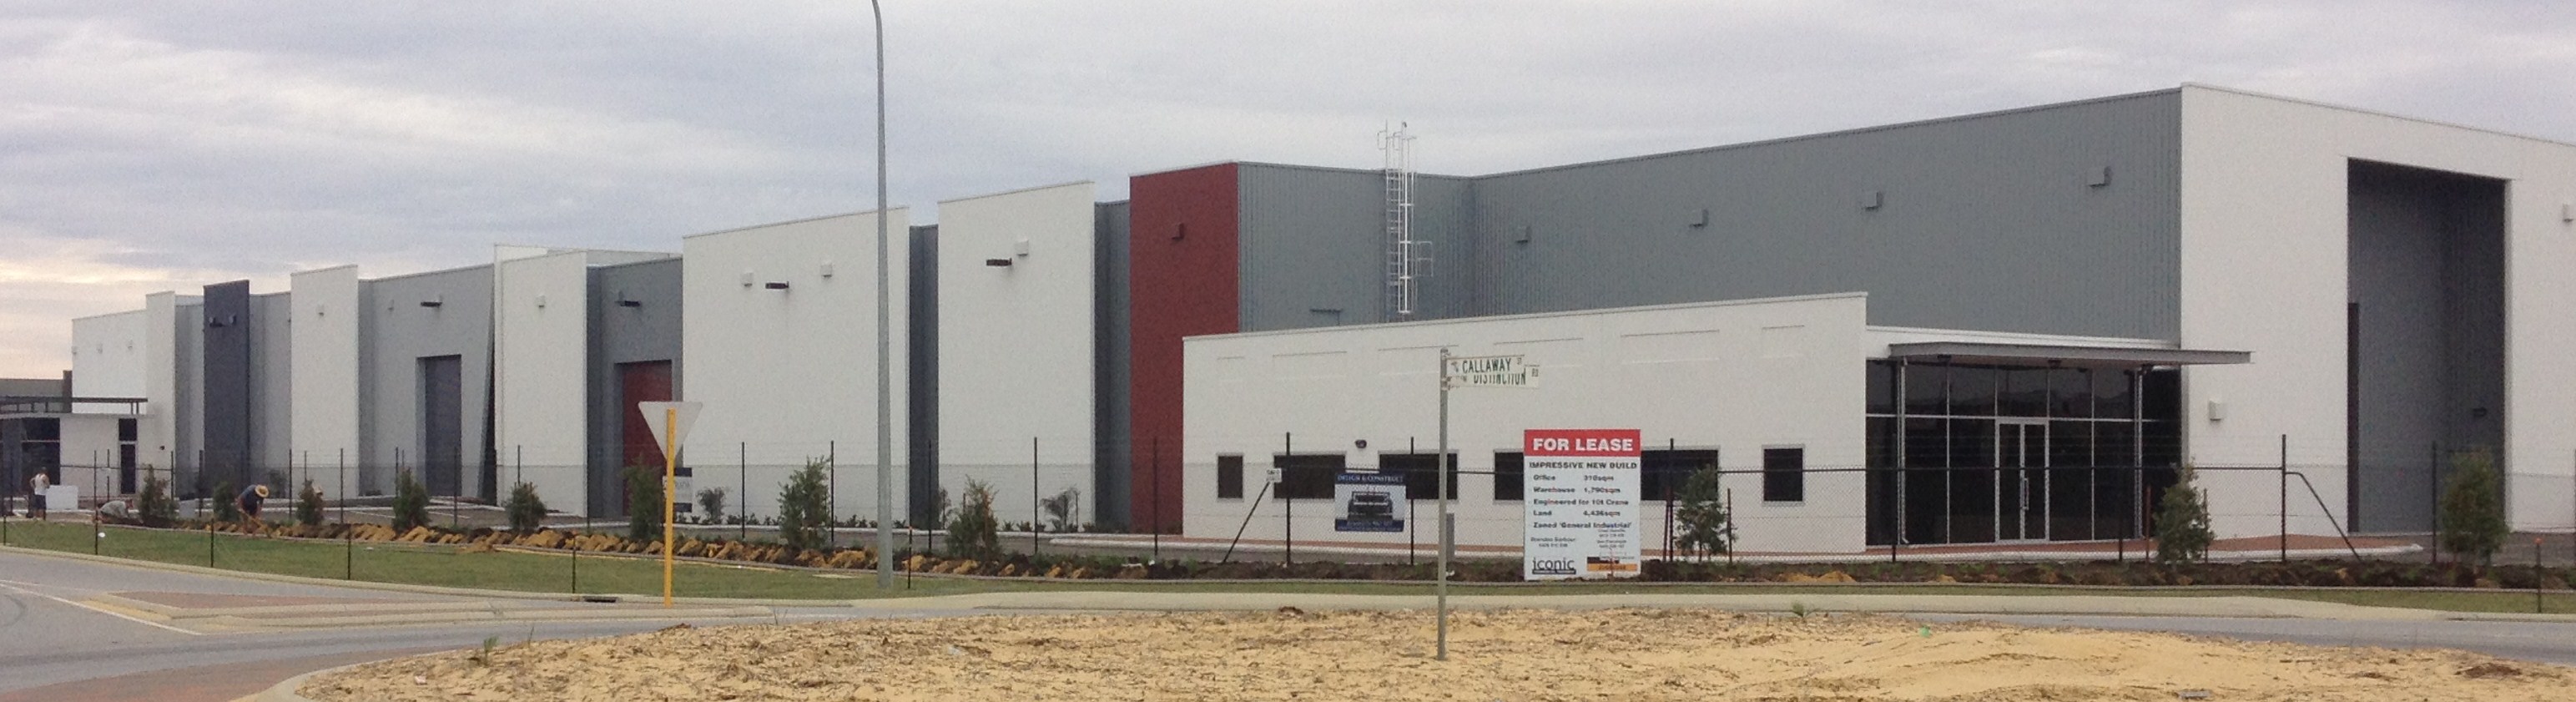 Exterior of large commercial multi-unit warehouse complex, finished in white, grey and red